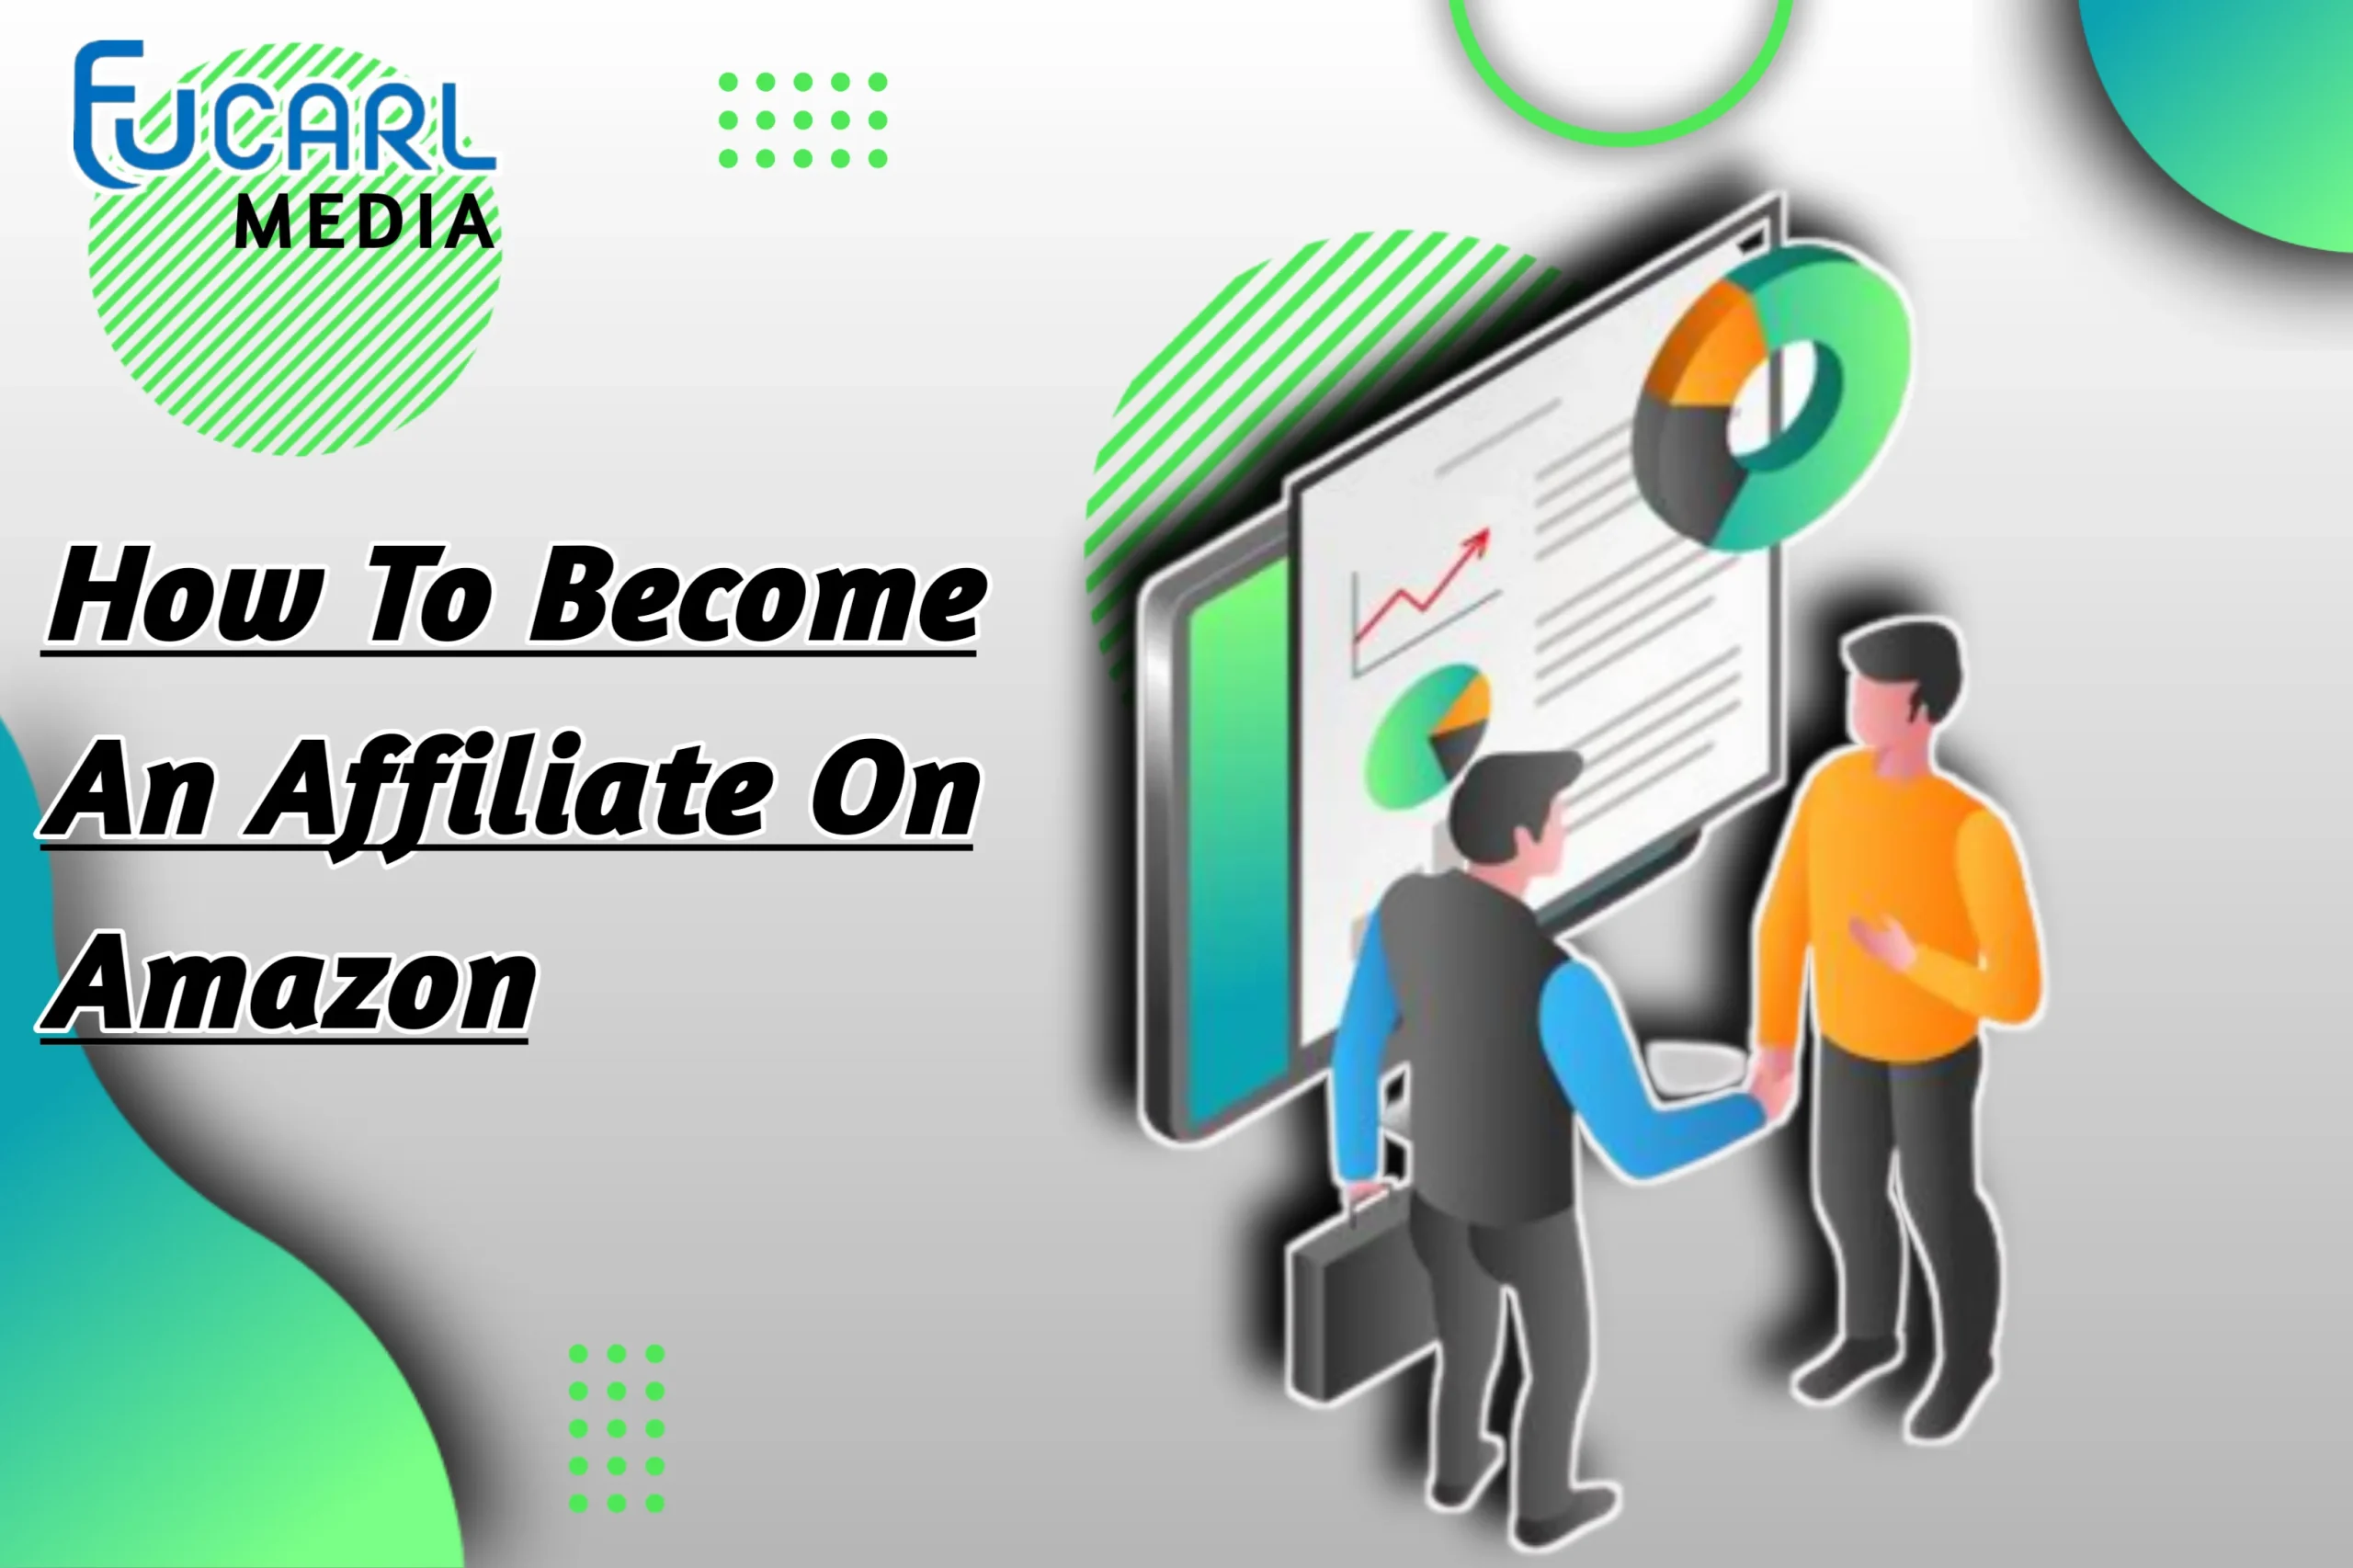 How To Become An Affiliate On Amazon Faster [5 Ultimate Steps]